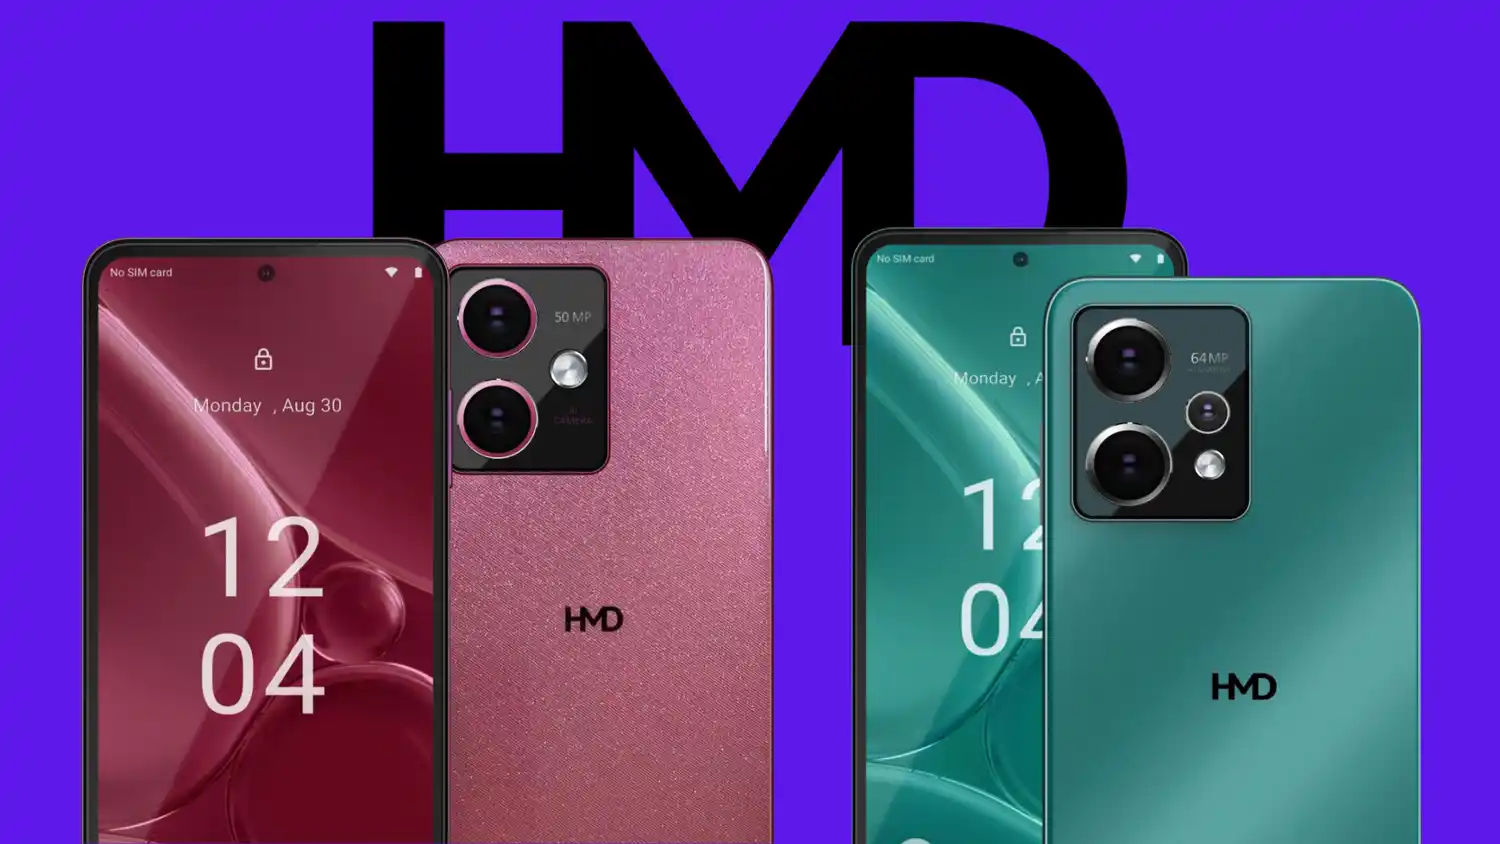 HMD unveiled the new Crest and Crest Max smartphones in India